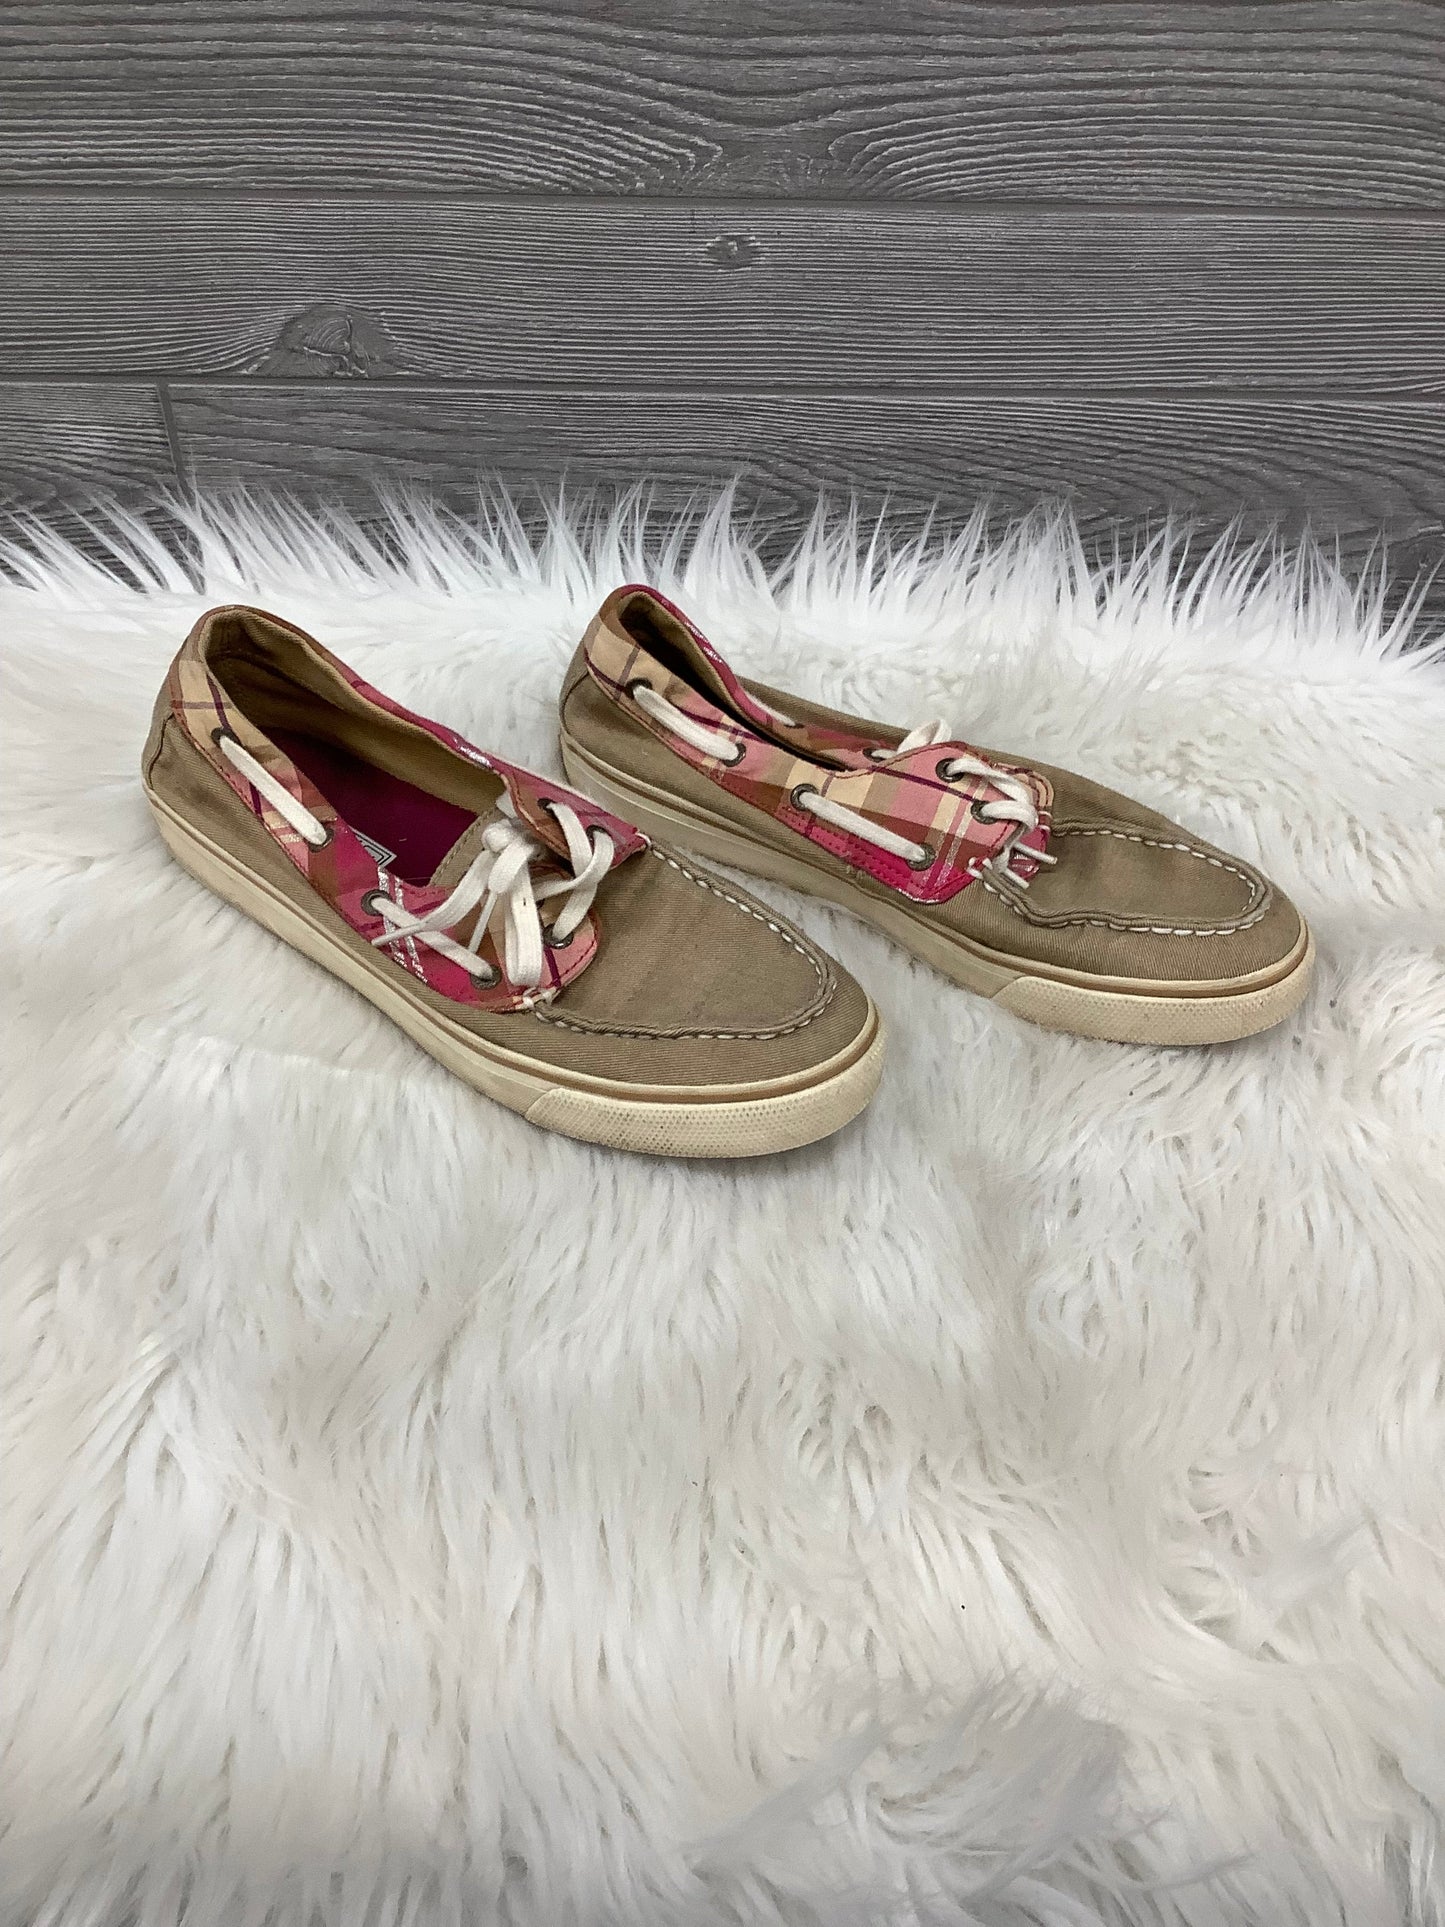 Shoes Flats Boat By Sperry  Size: 8